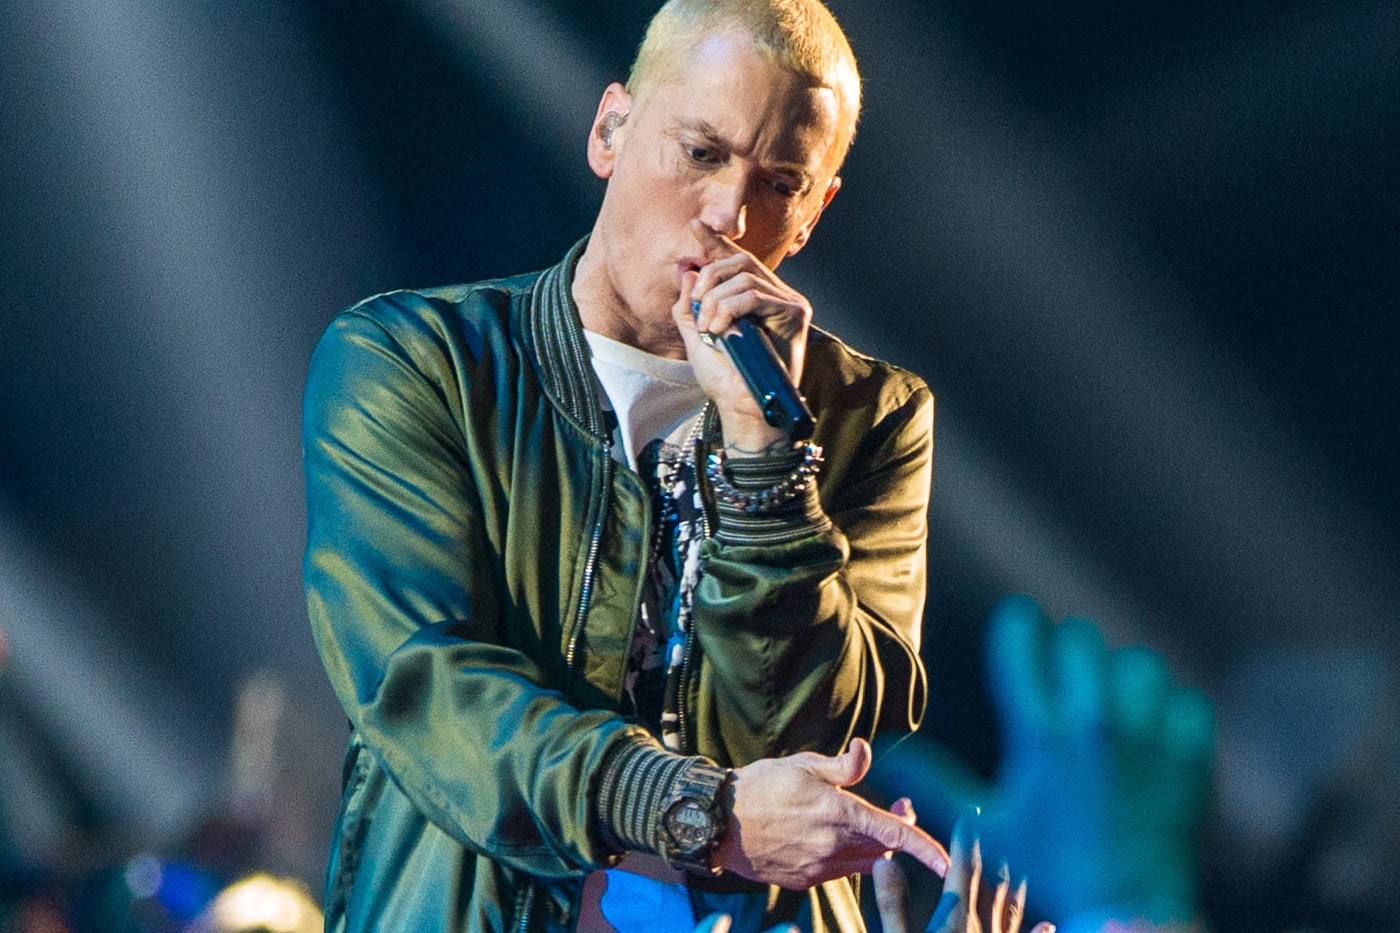 Eminem Scores 2010's Best Sales Debut With "Recovery"